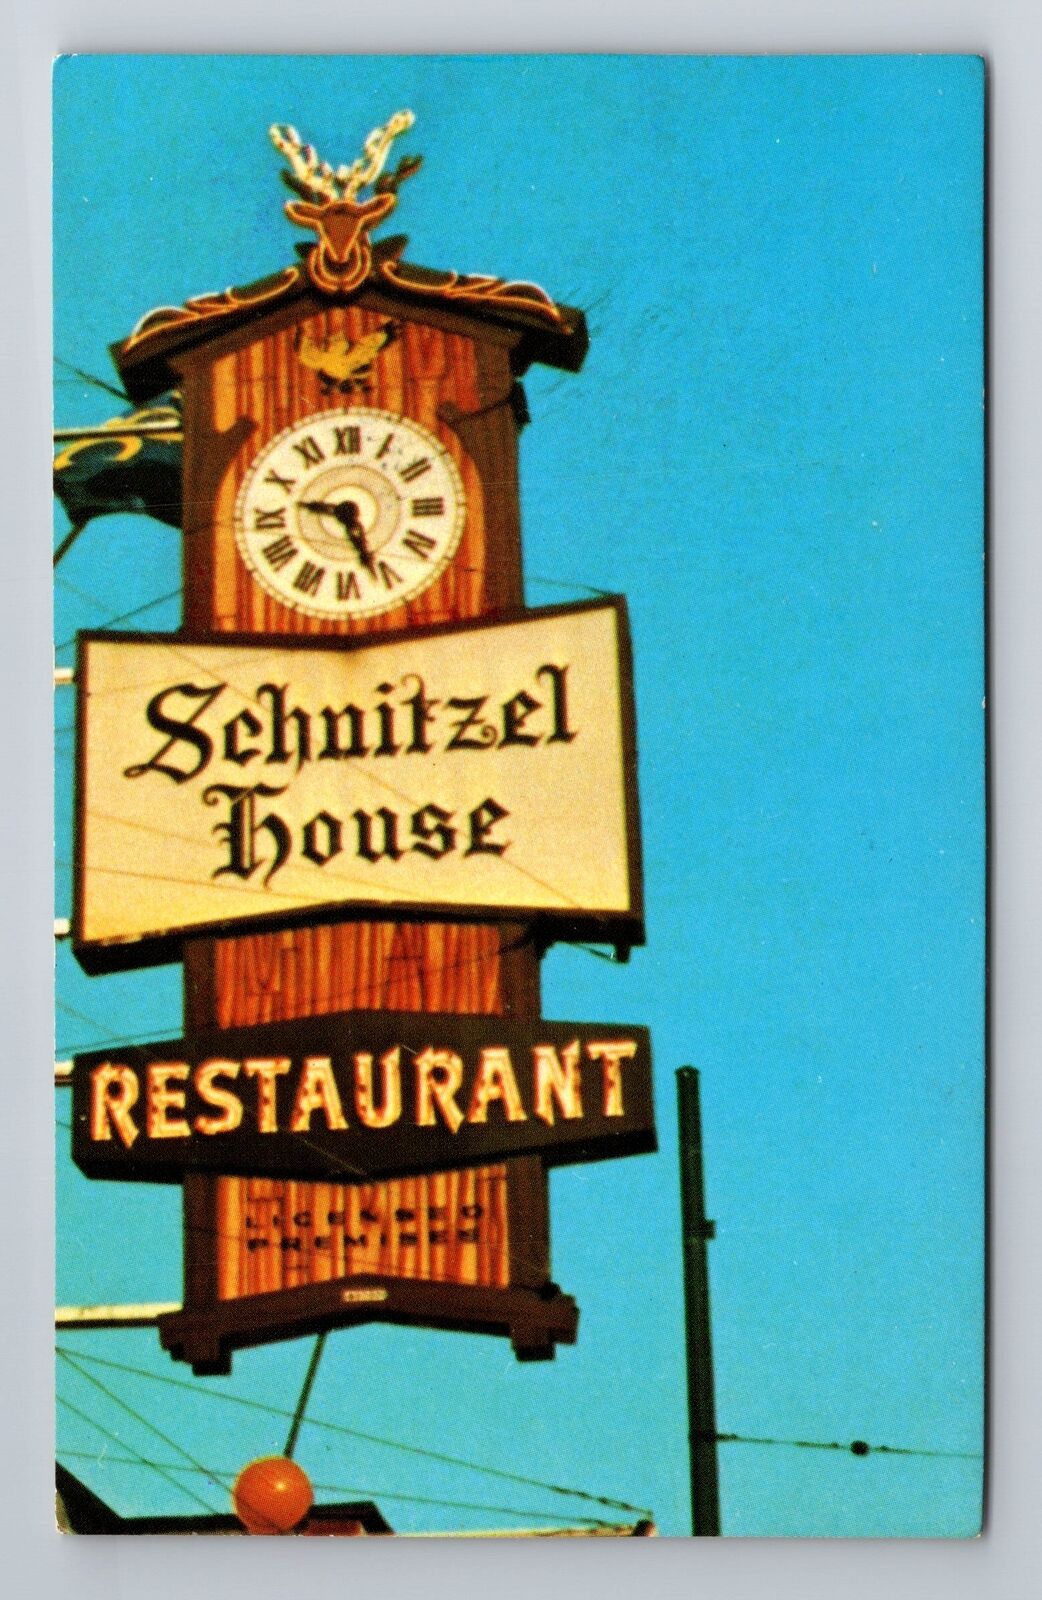 Vancouver-British Columbia, the Schnitzel House, Advertising, Vintage Postcard